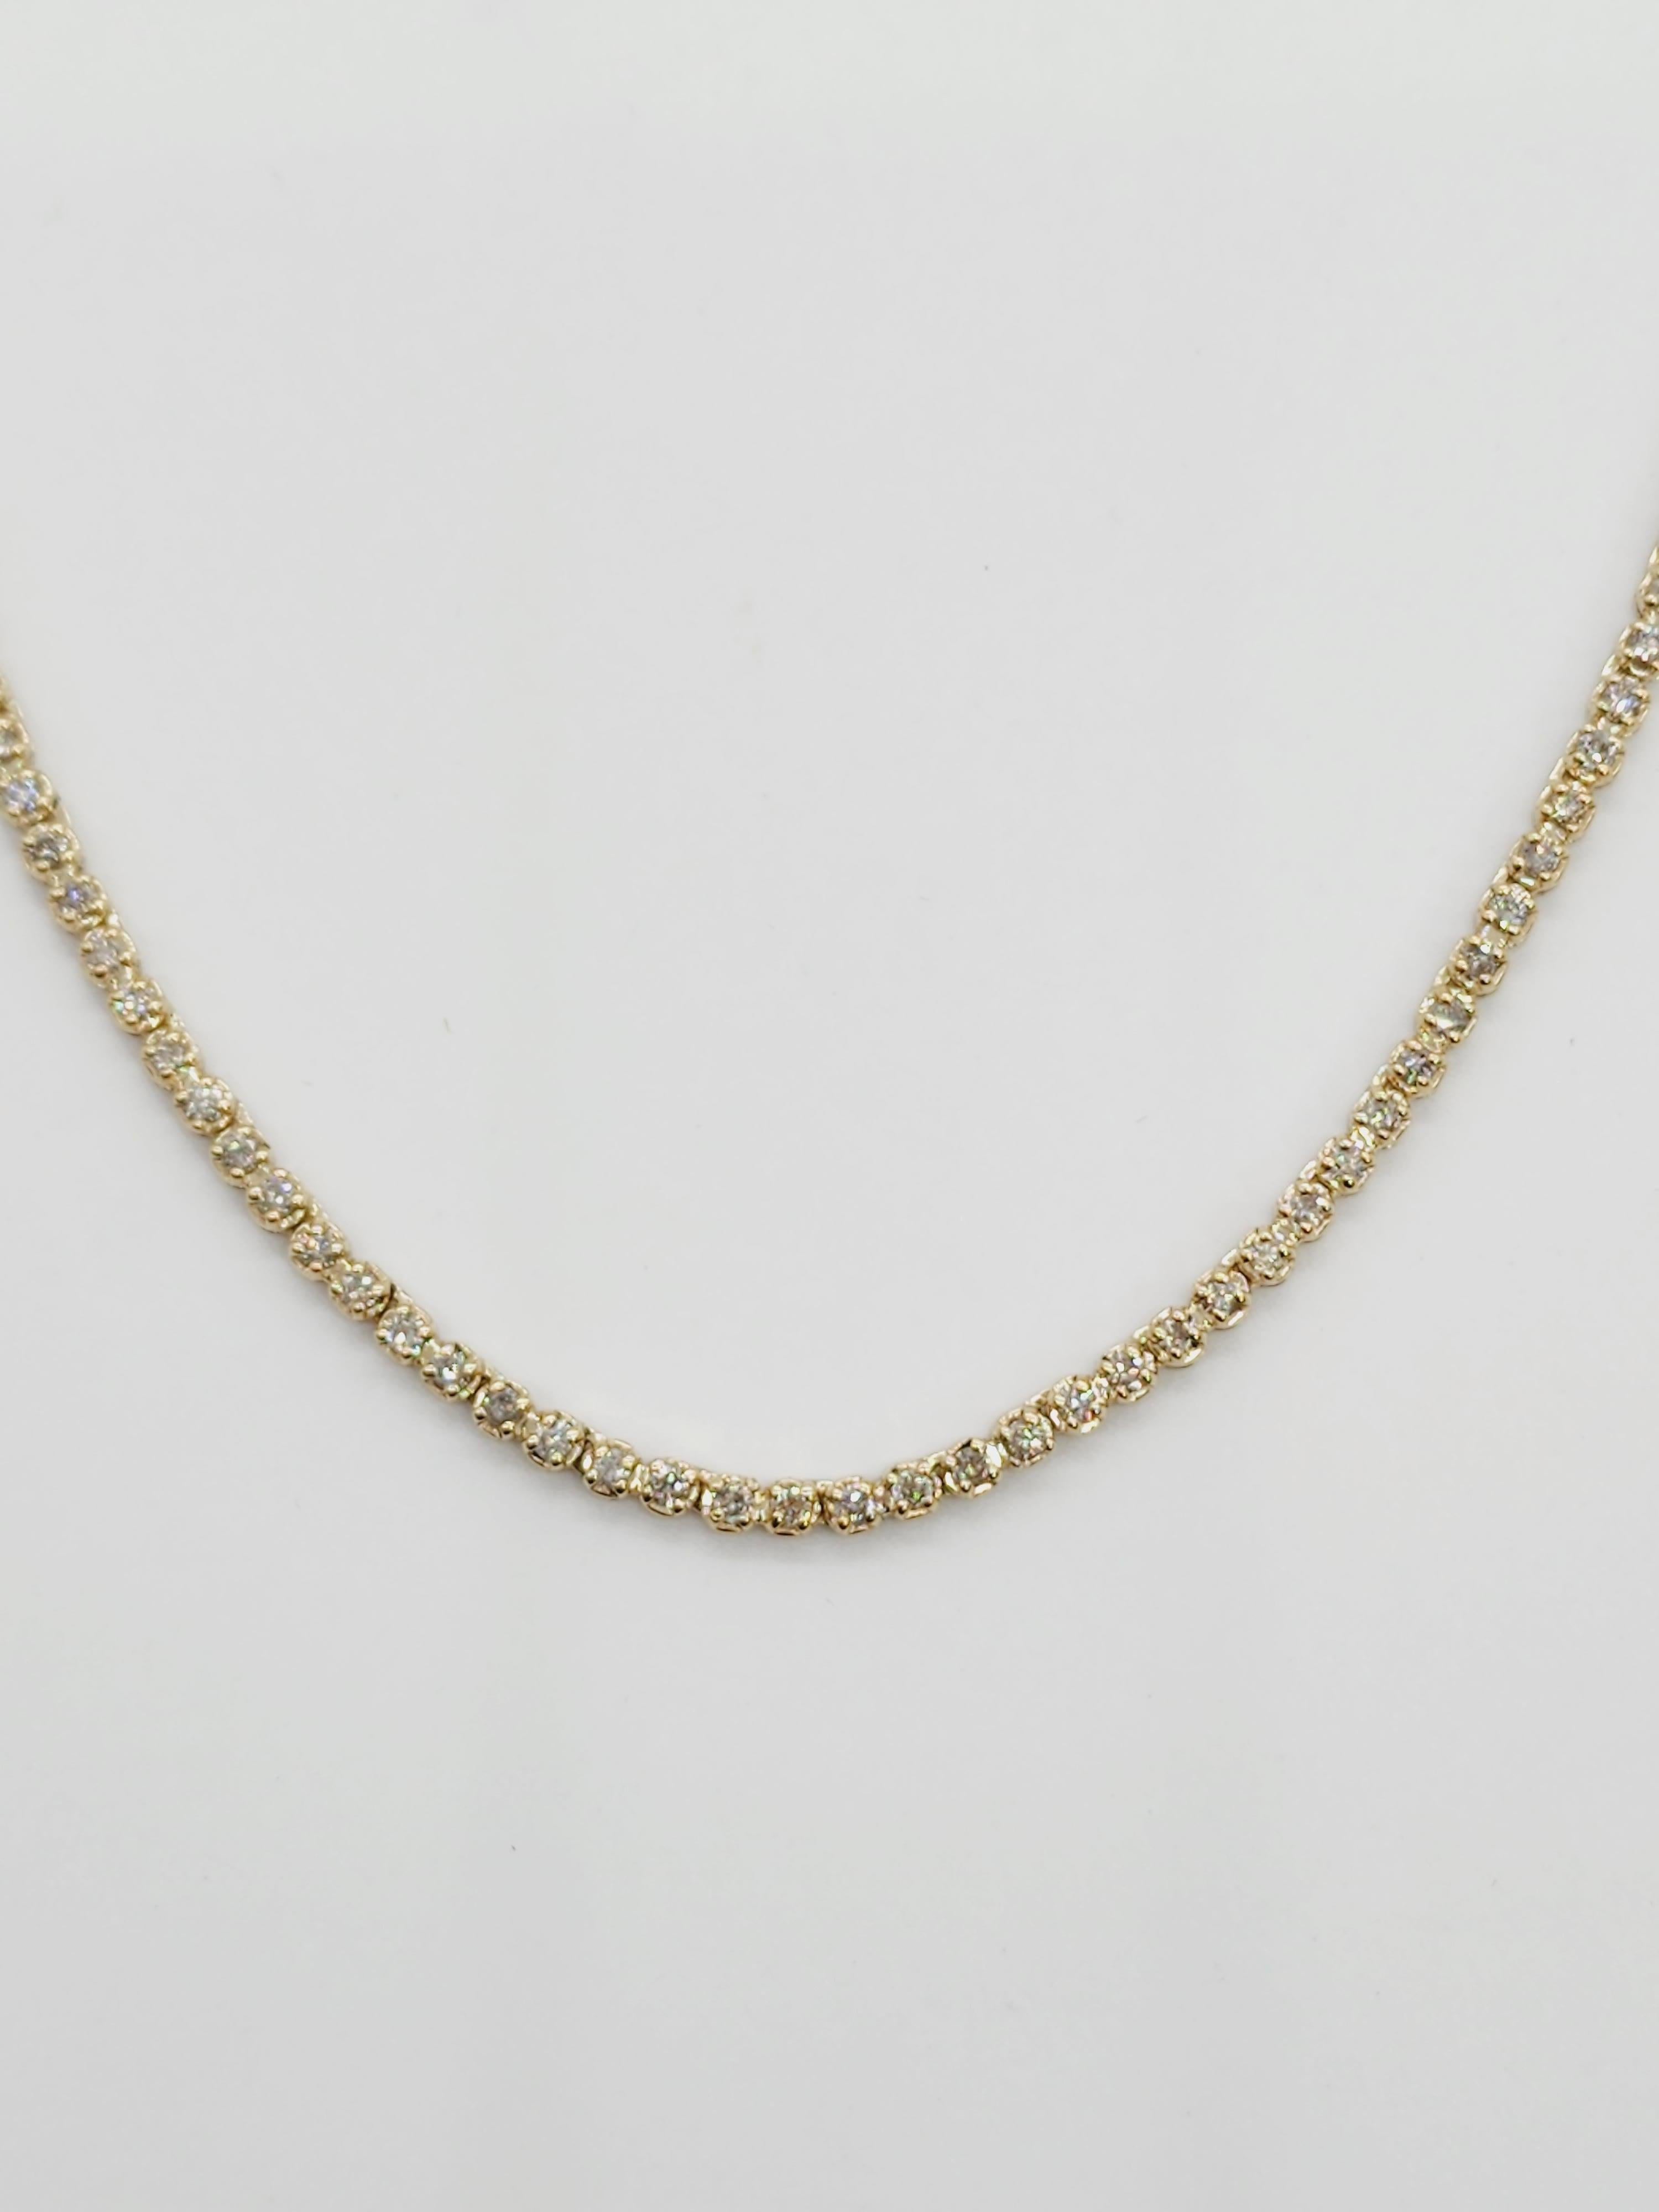 Brilliant and beautiful buttercup necklace, natural round-brilliant cut 
14k yellow gold buttercup setting. 
16 inch length. Average I Color, SI Clarity. 